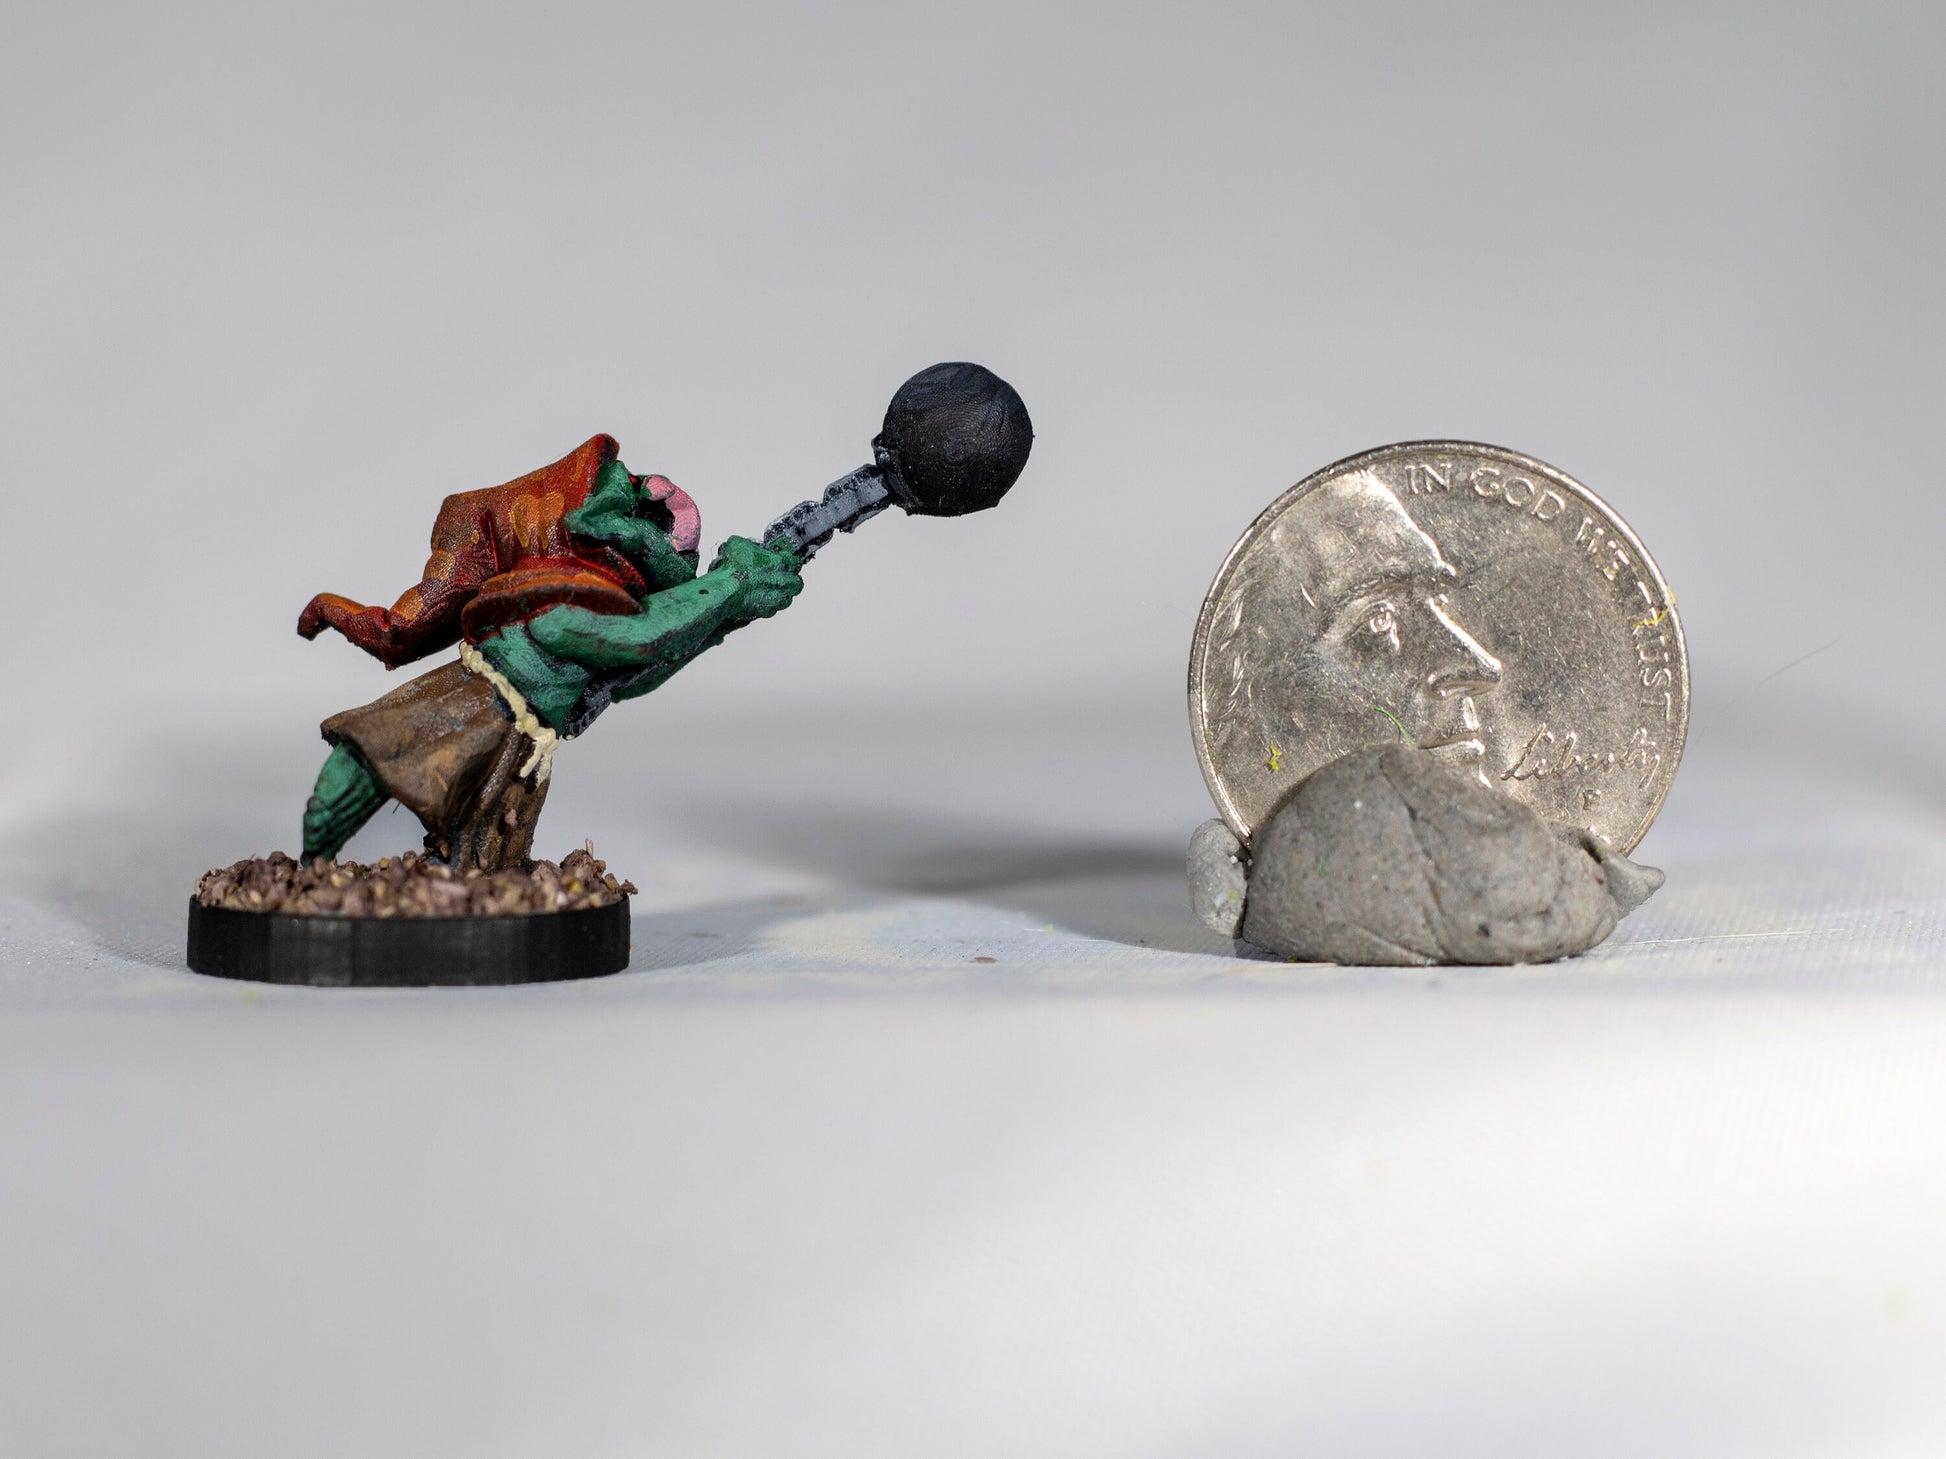 Goblins with Ball and Chain - 3 Duncan Shadow Printed Miniatures | Dungeons & Dragons | Pathfinder | Tabletop